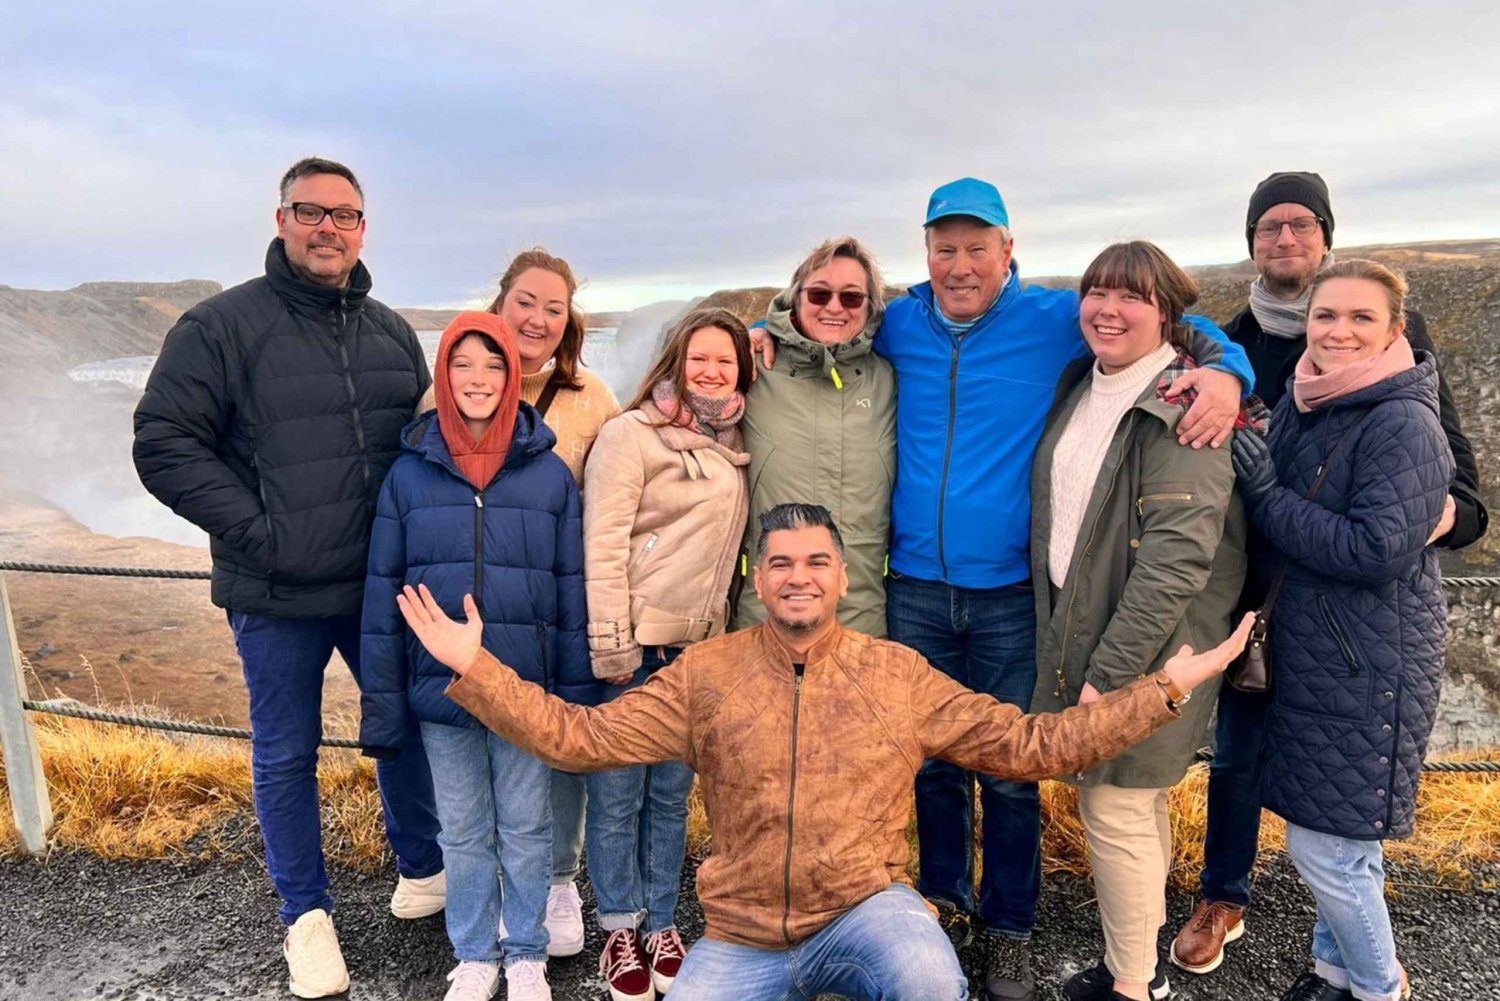 South Iceland:Exclusive Day Tour of Golden Circle